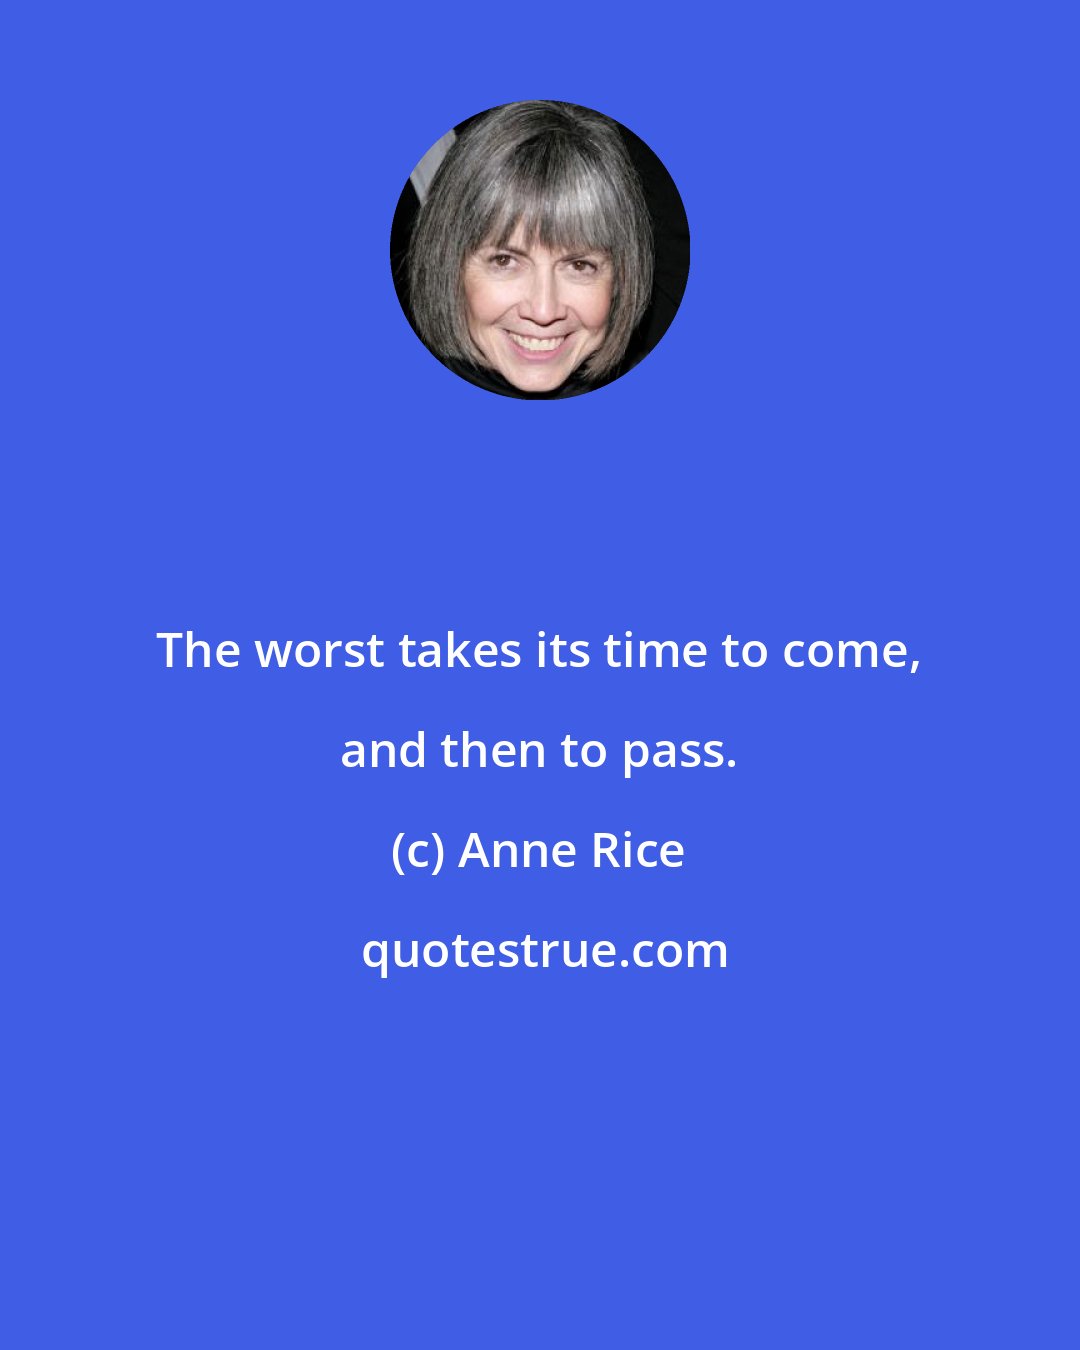 Anne Rice: The worst takes its time to come, and then to pass.